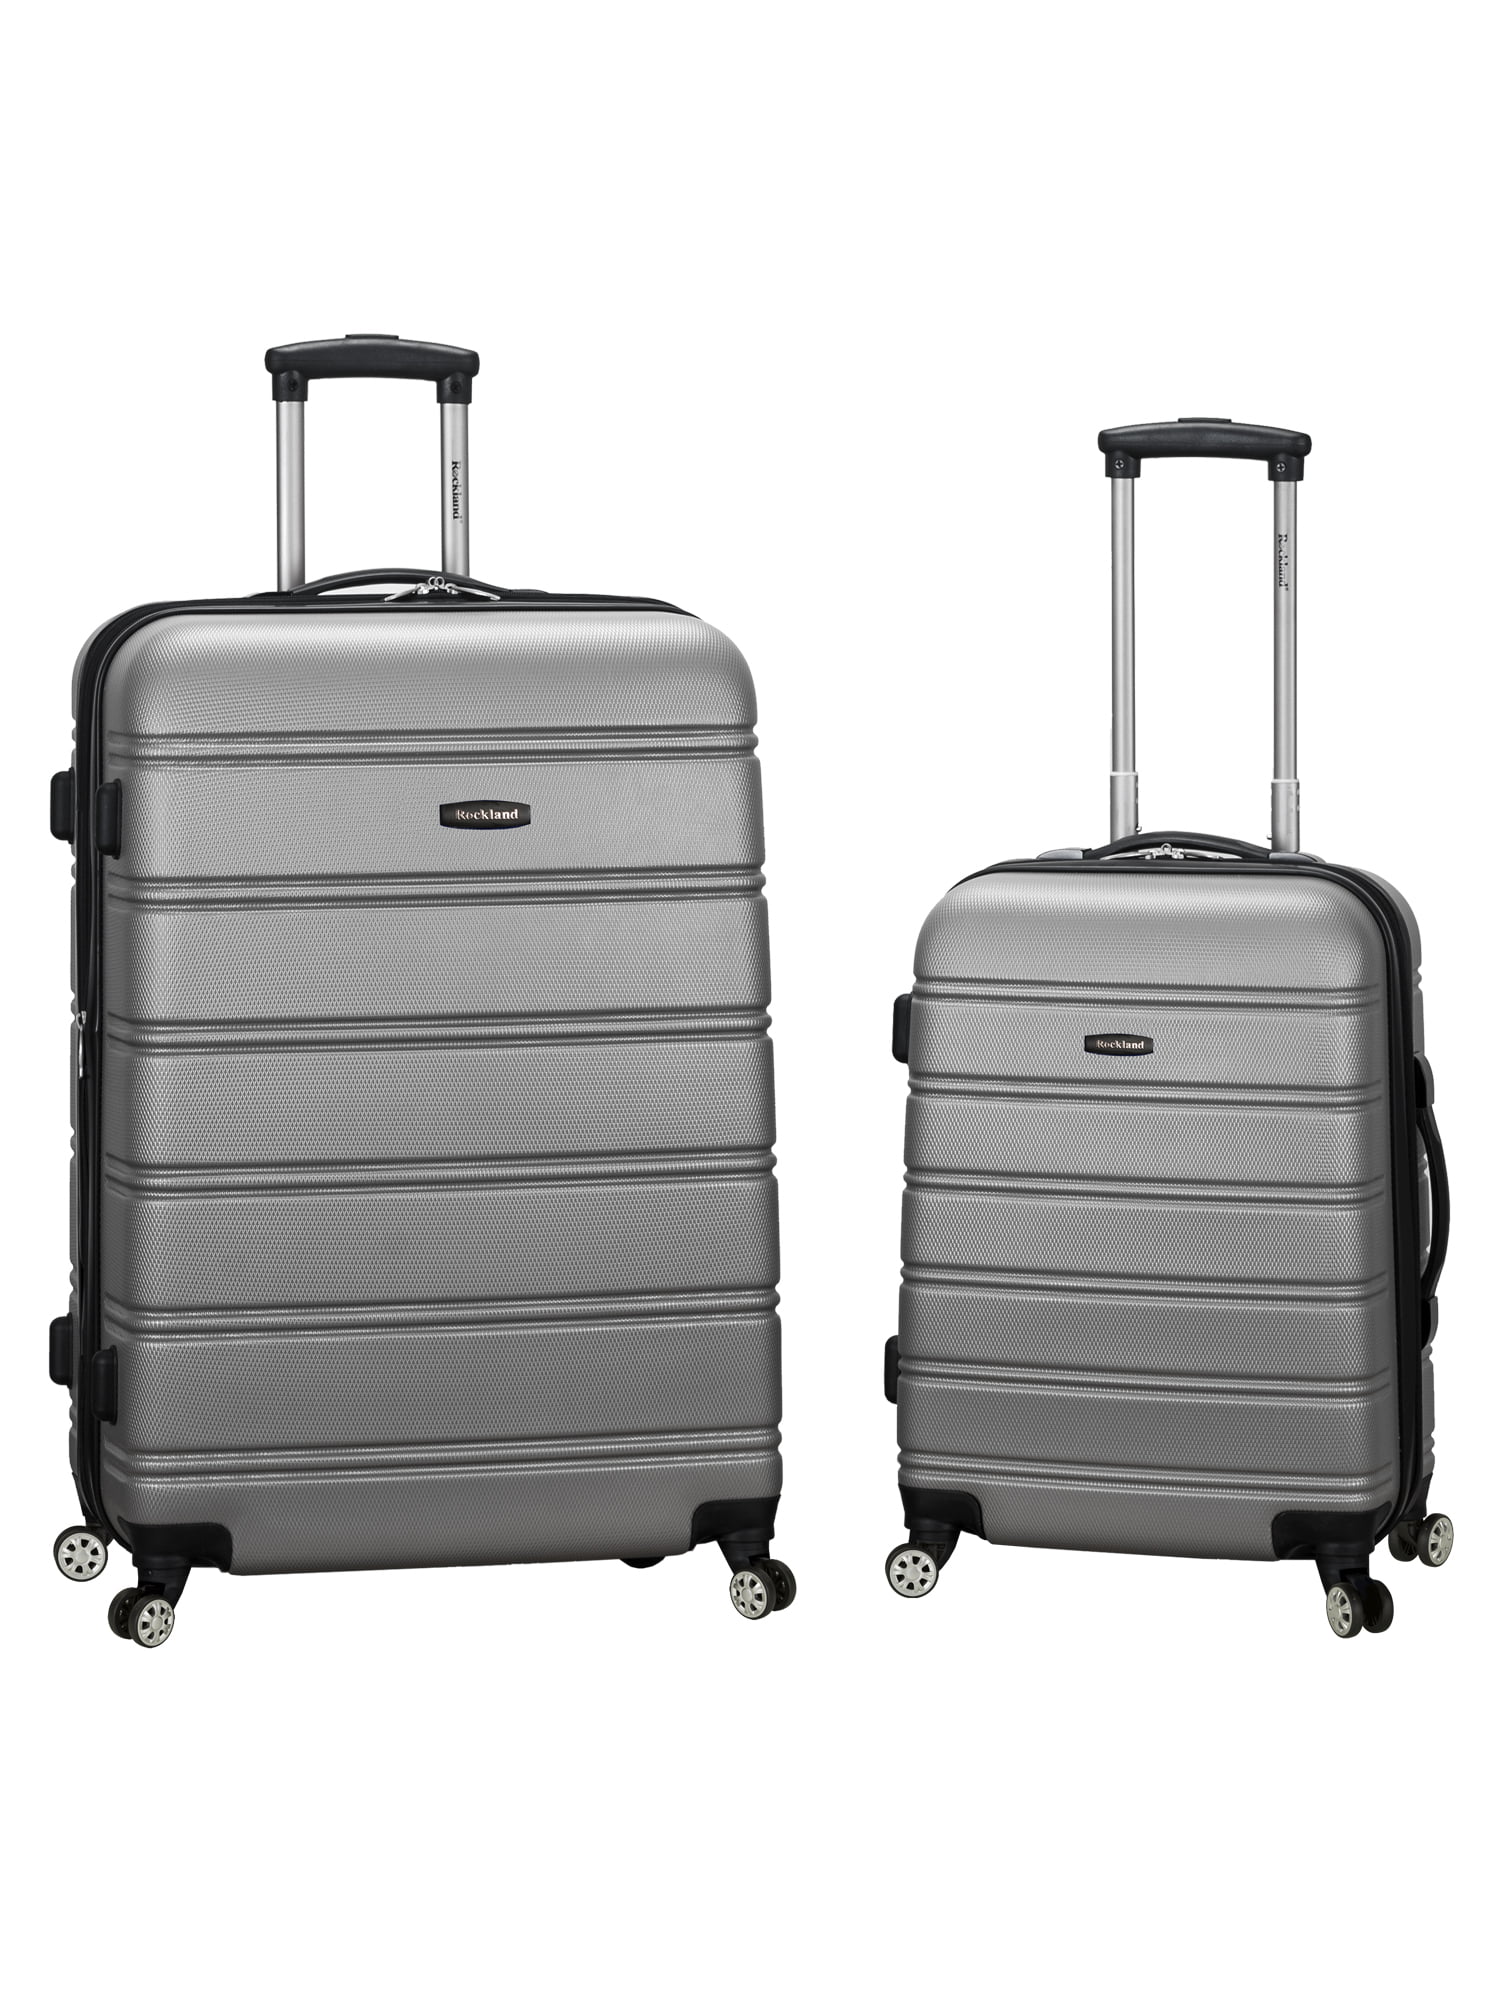 One Size Rockland Luggage 20 Inch and 28 Inch 2 Piece Expandable Spinner Set Black 